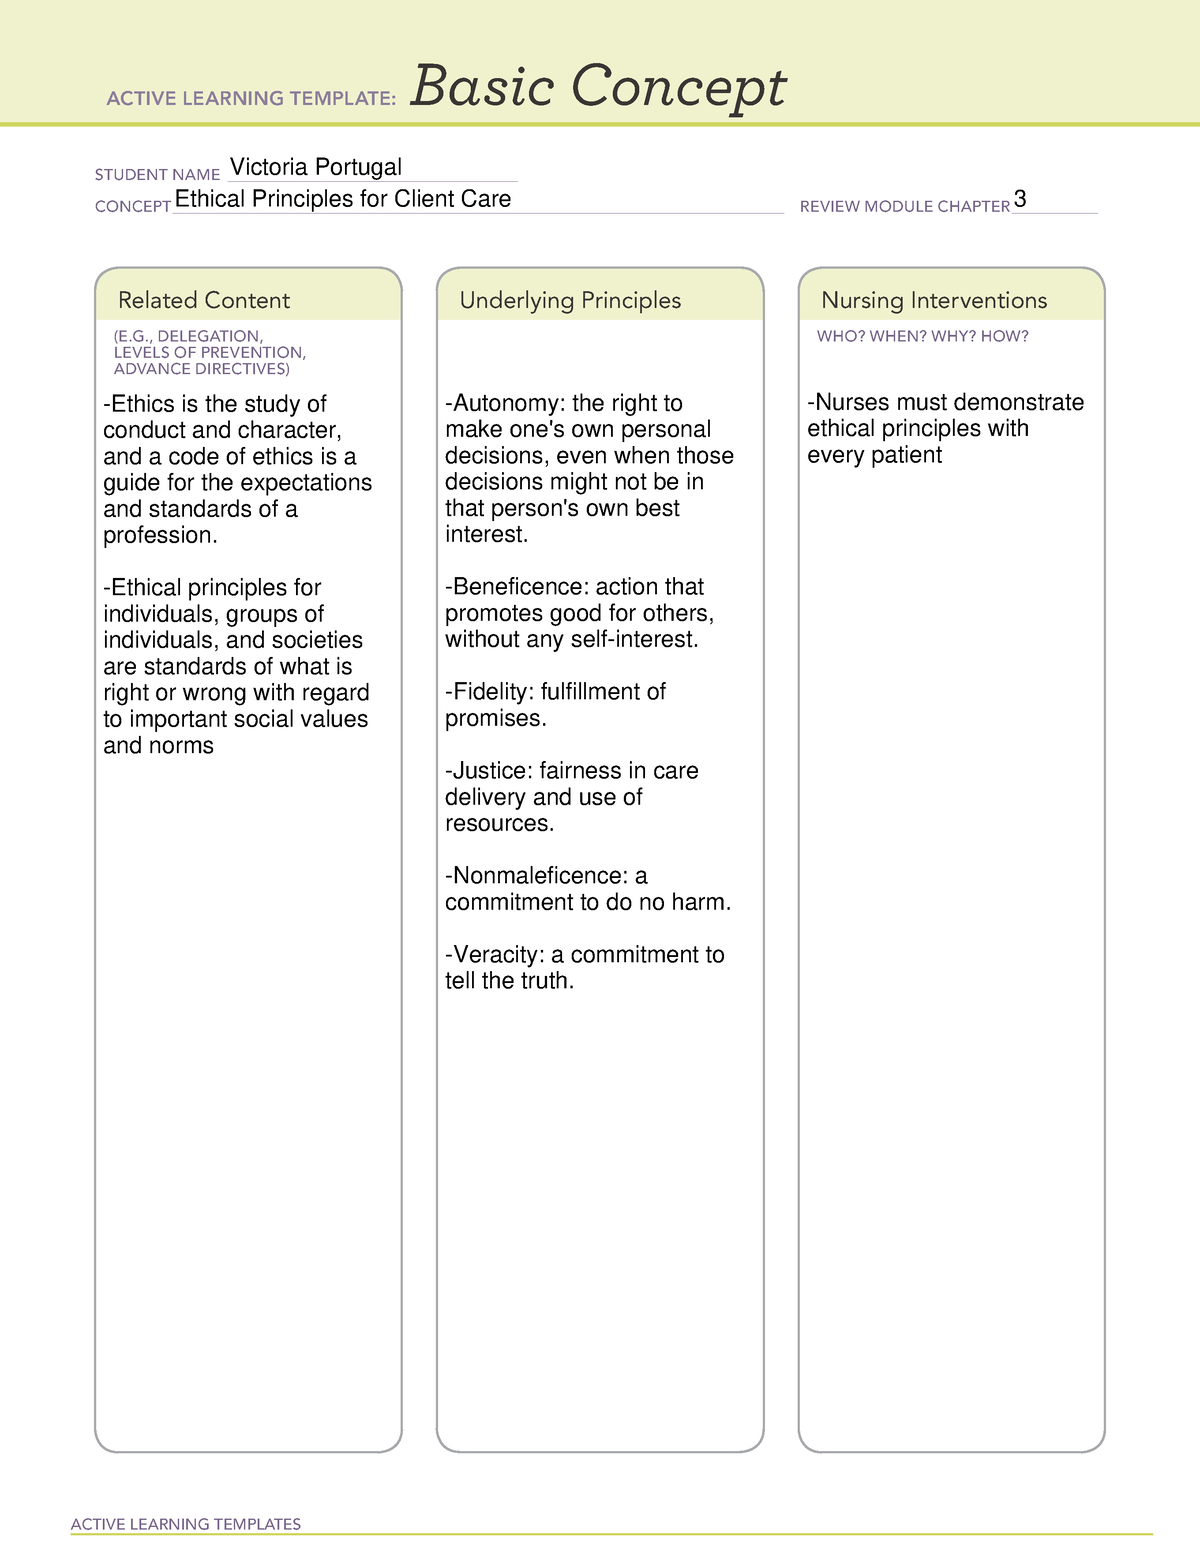 Ethical Principles Basic Concept ACTIVE LEARNING TEMPLATES Basic